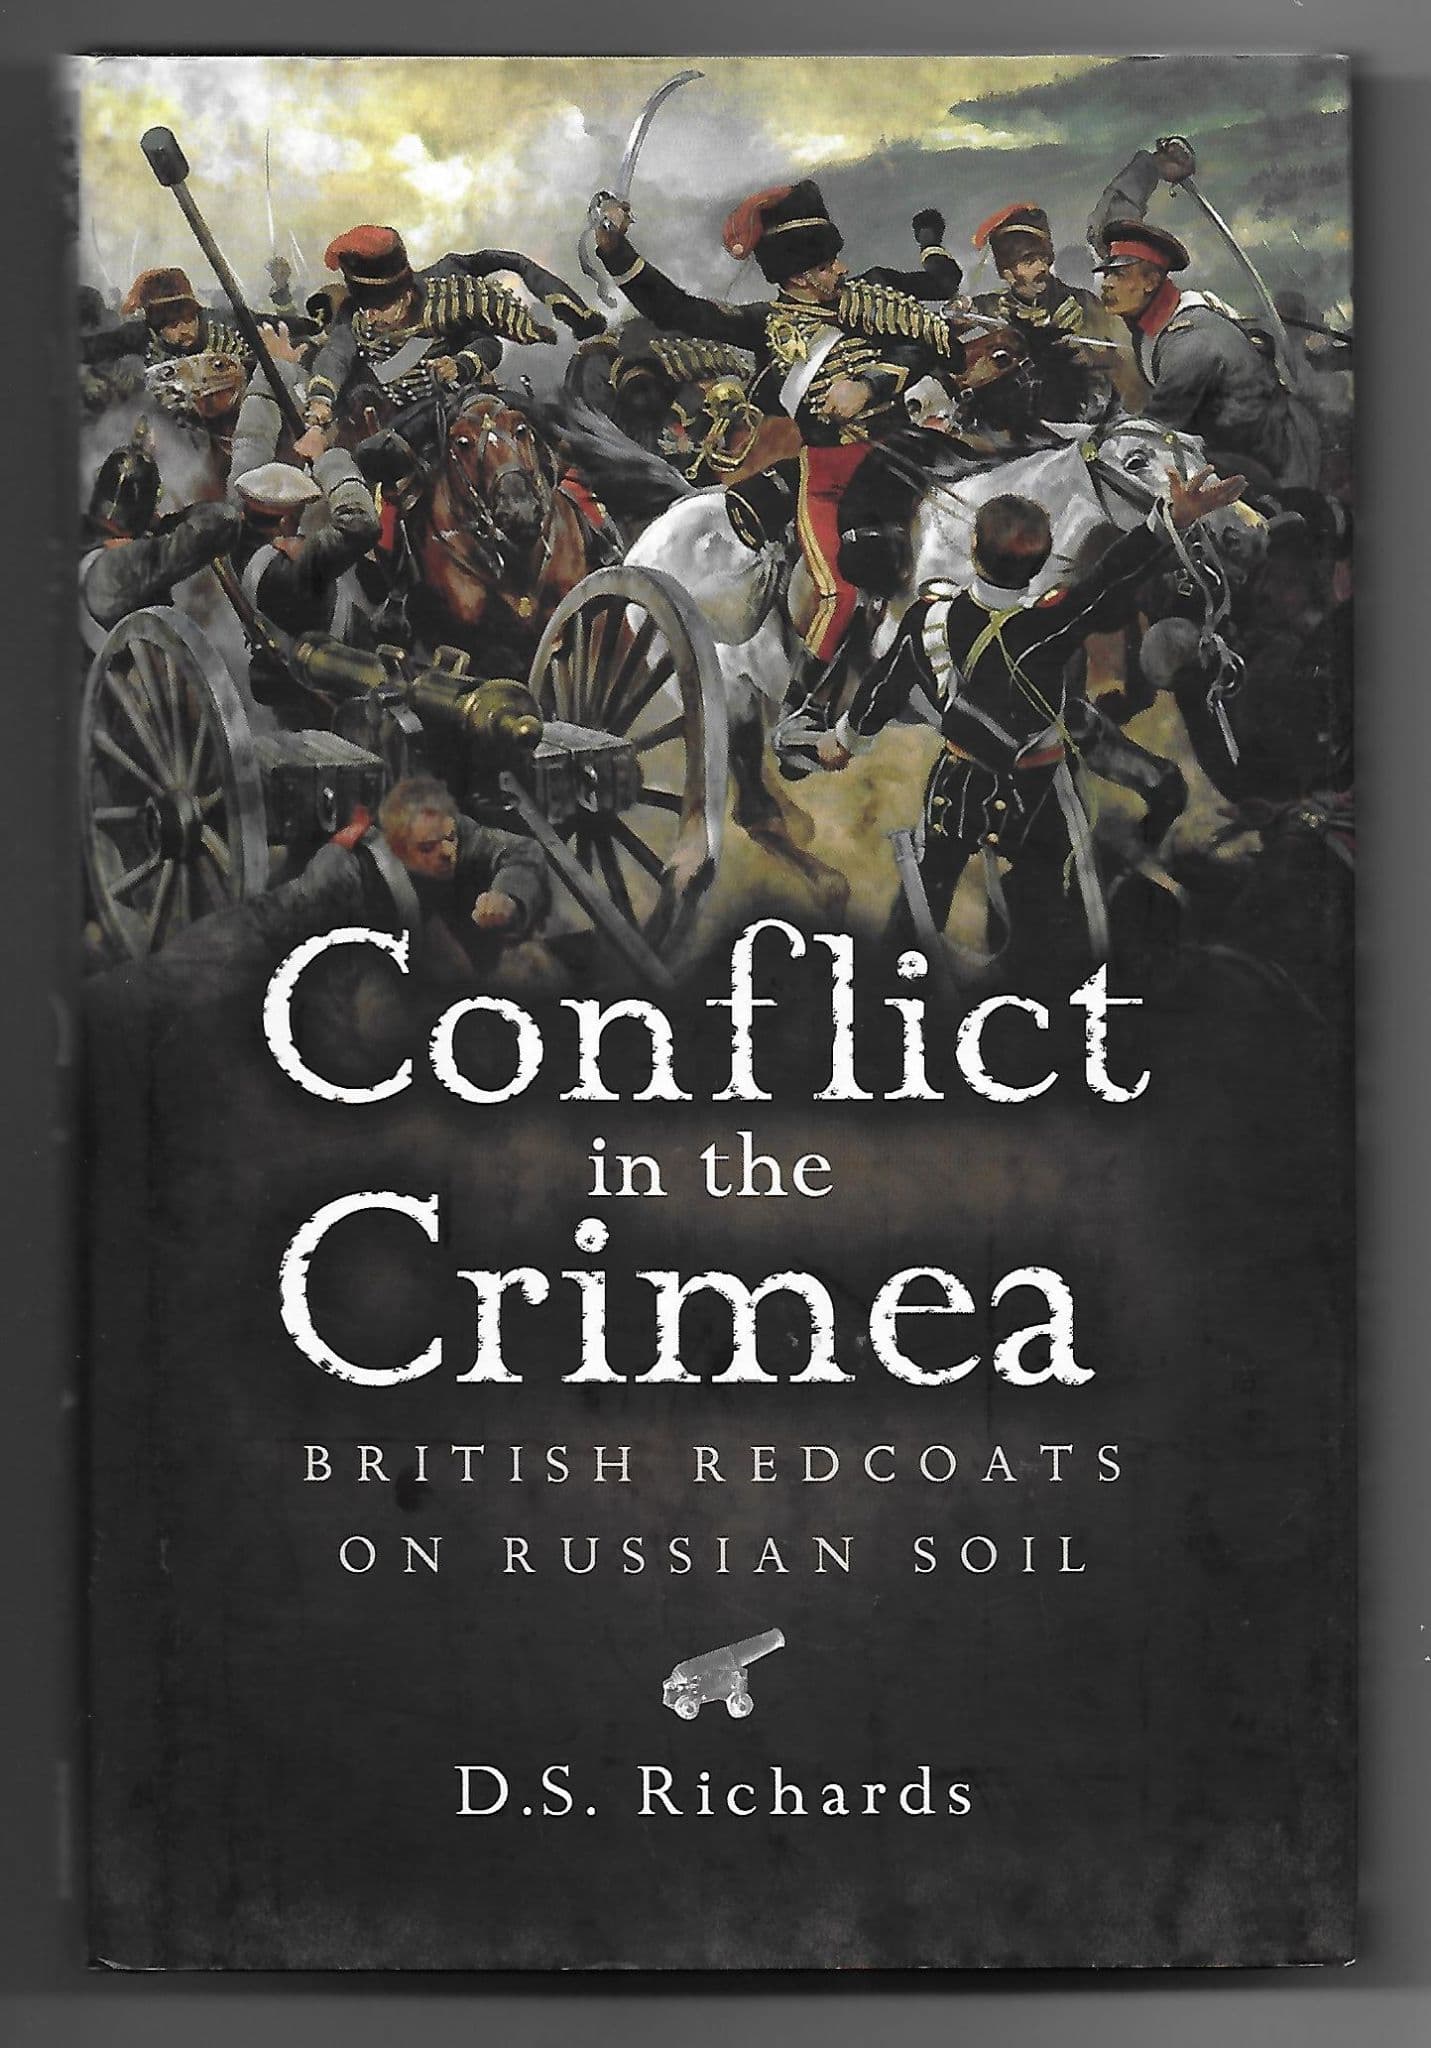 Conflict in the Crimea, British Redcoats on Russian Soil